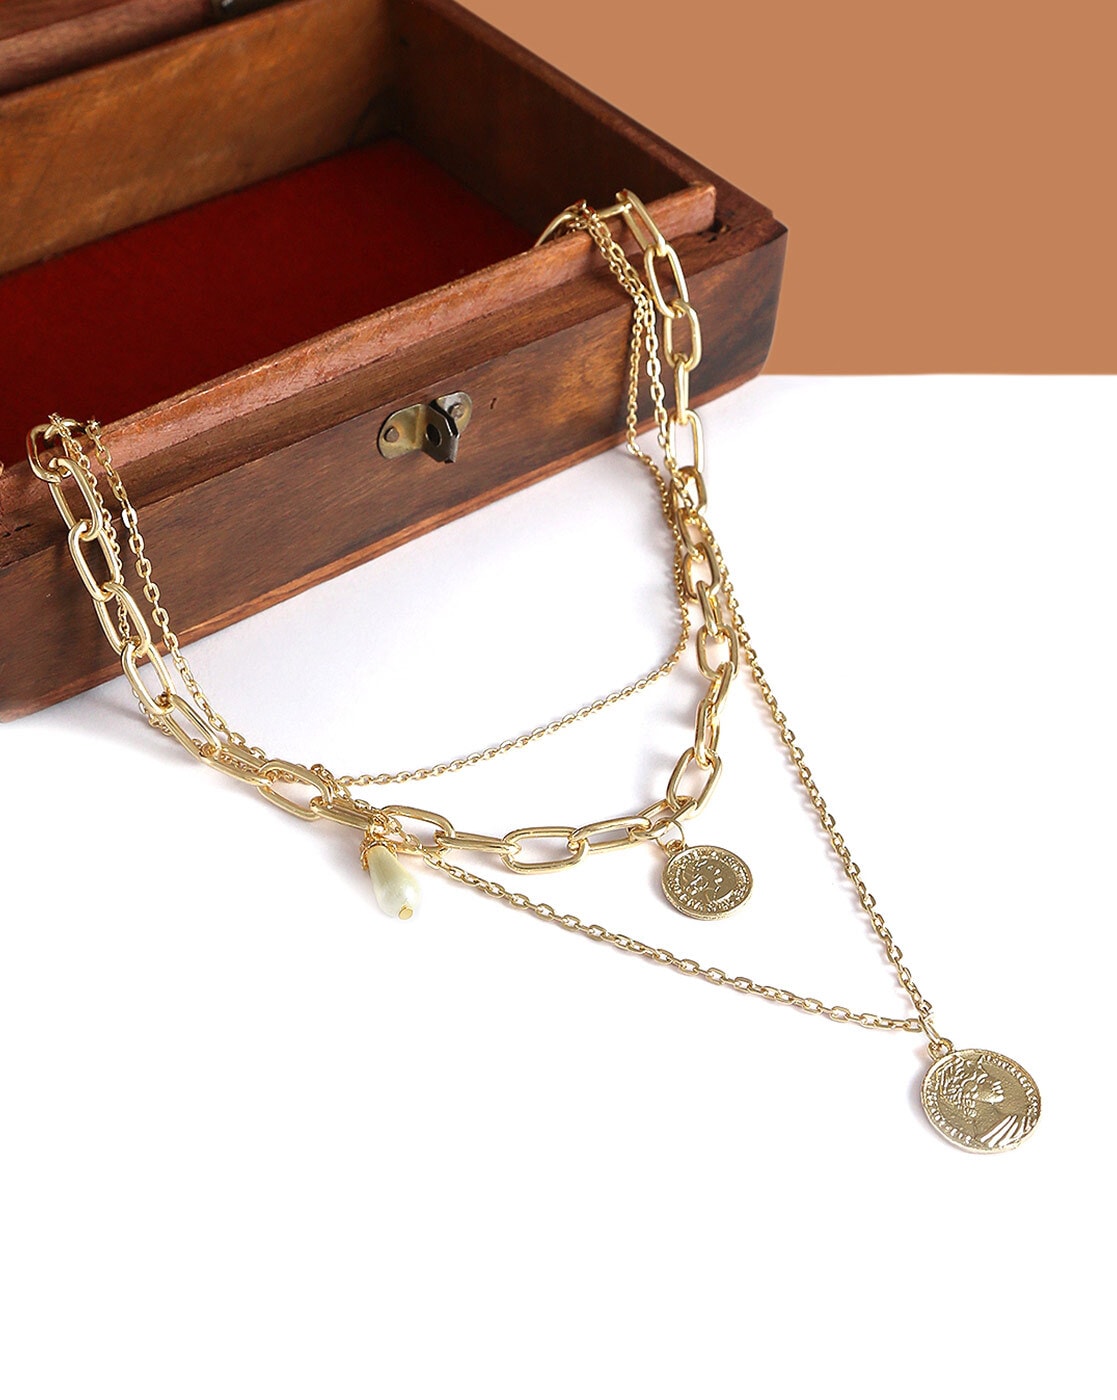 Buy Gold-Toned Necklaces & Pendants for Women by The Pari Online